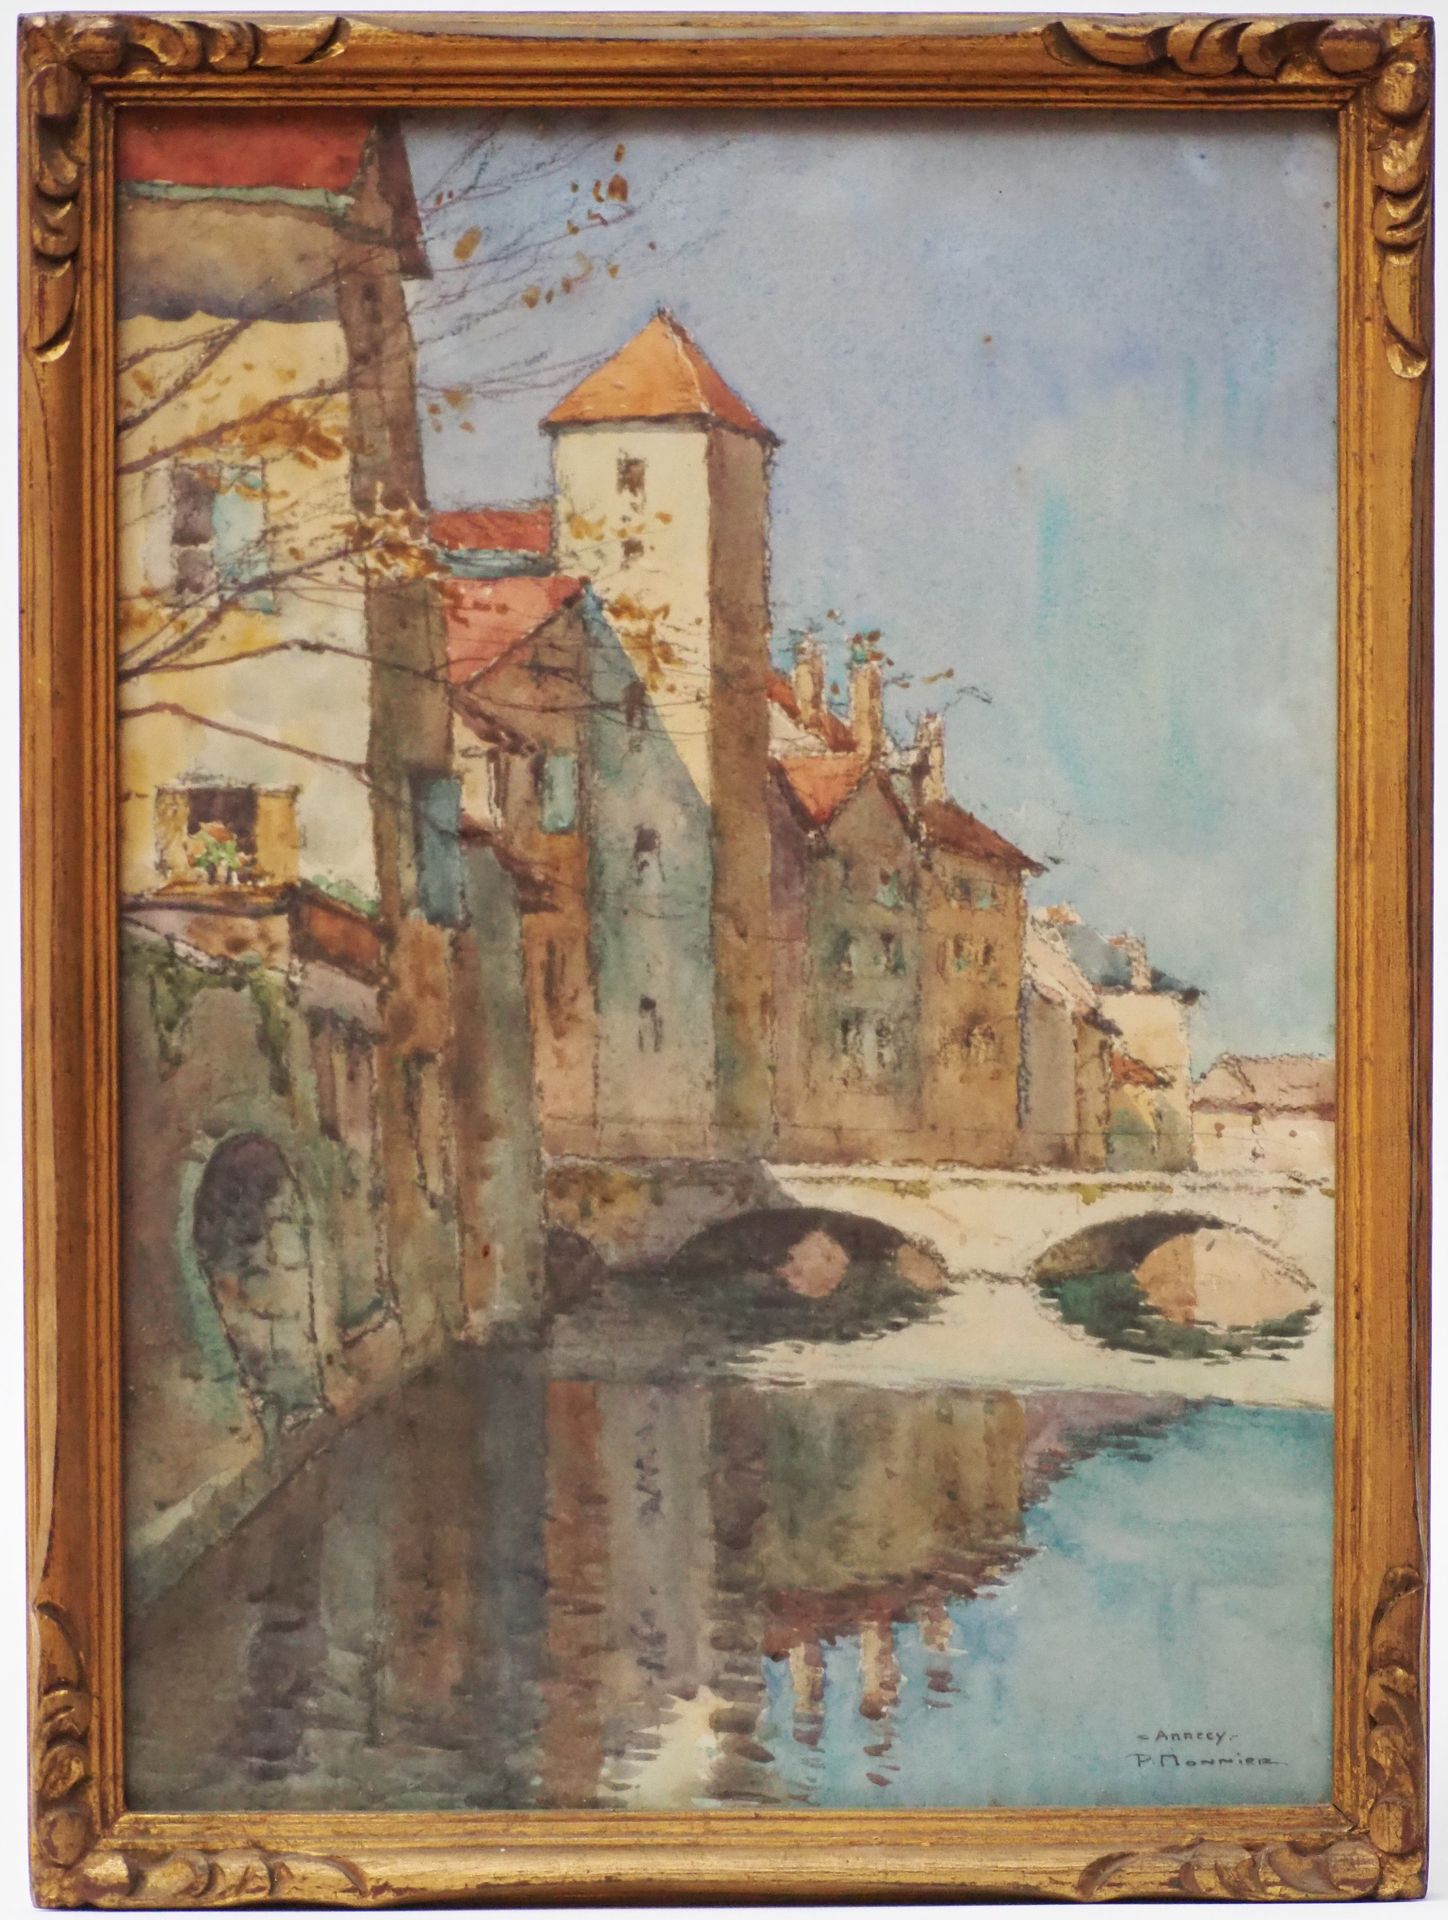 Null Paul MONNIER (1907-1982)
Annecy / Semur
Suite of two watercolors on paper, &hellip;